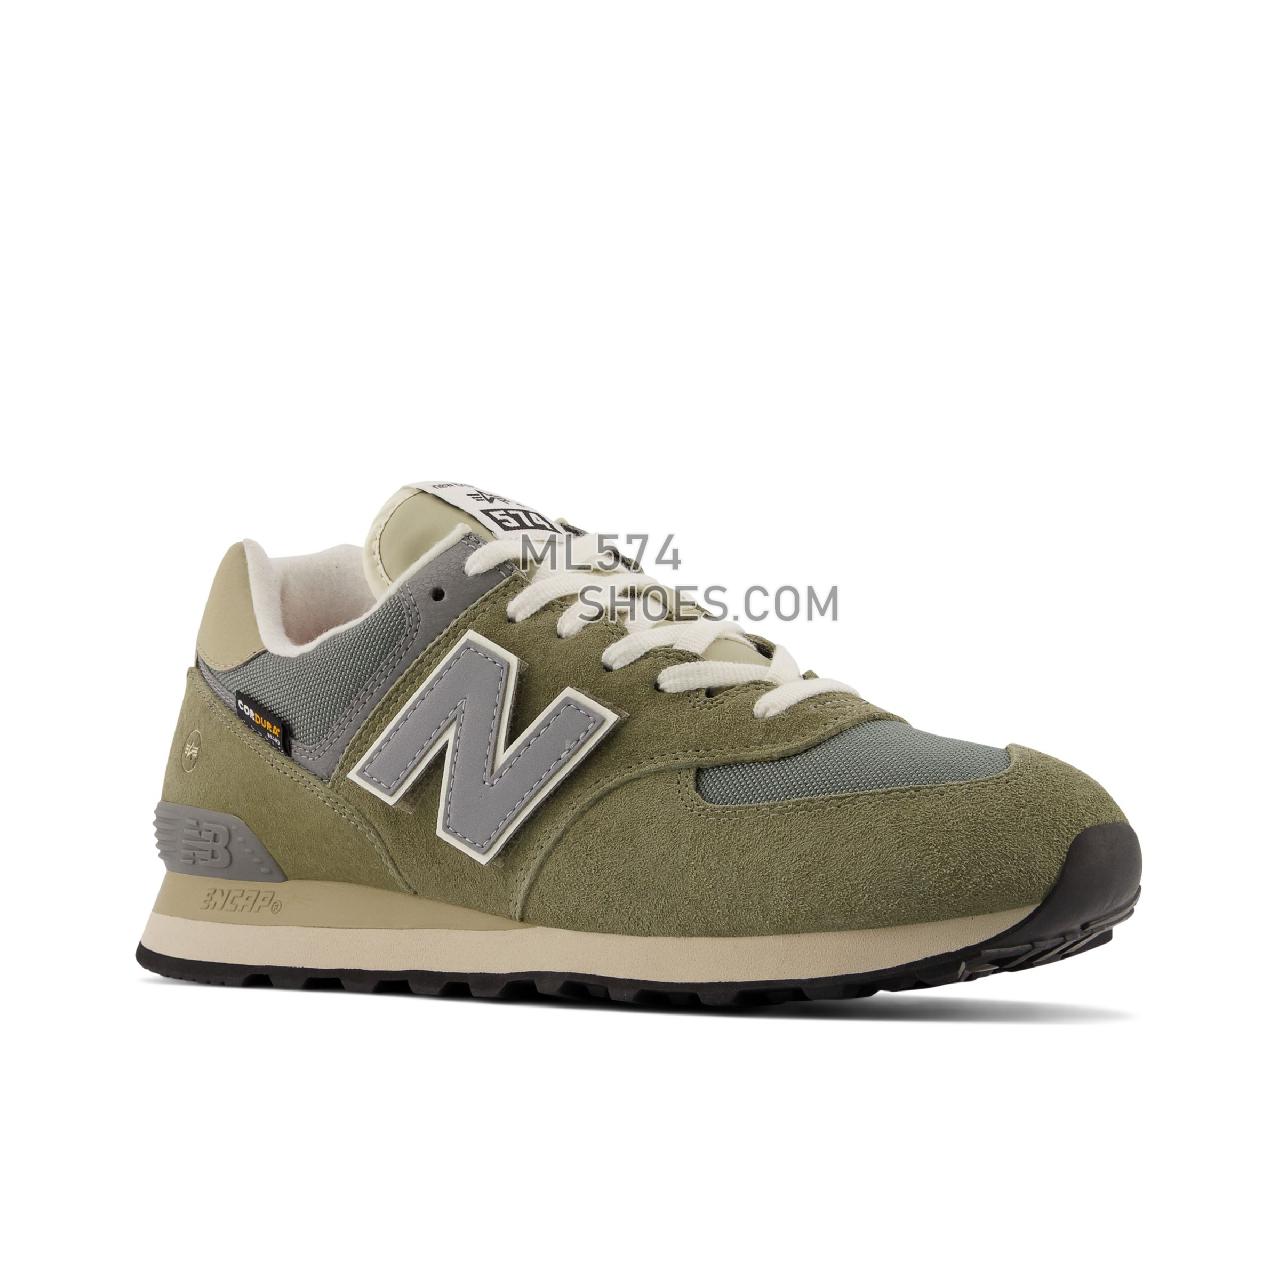 New Balance Alpha Industries 574v2 - Men's Classic Sneakers - Vetiver with Sedona Sage and Covert Green - ML574AI2